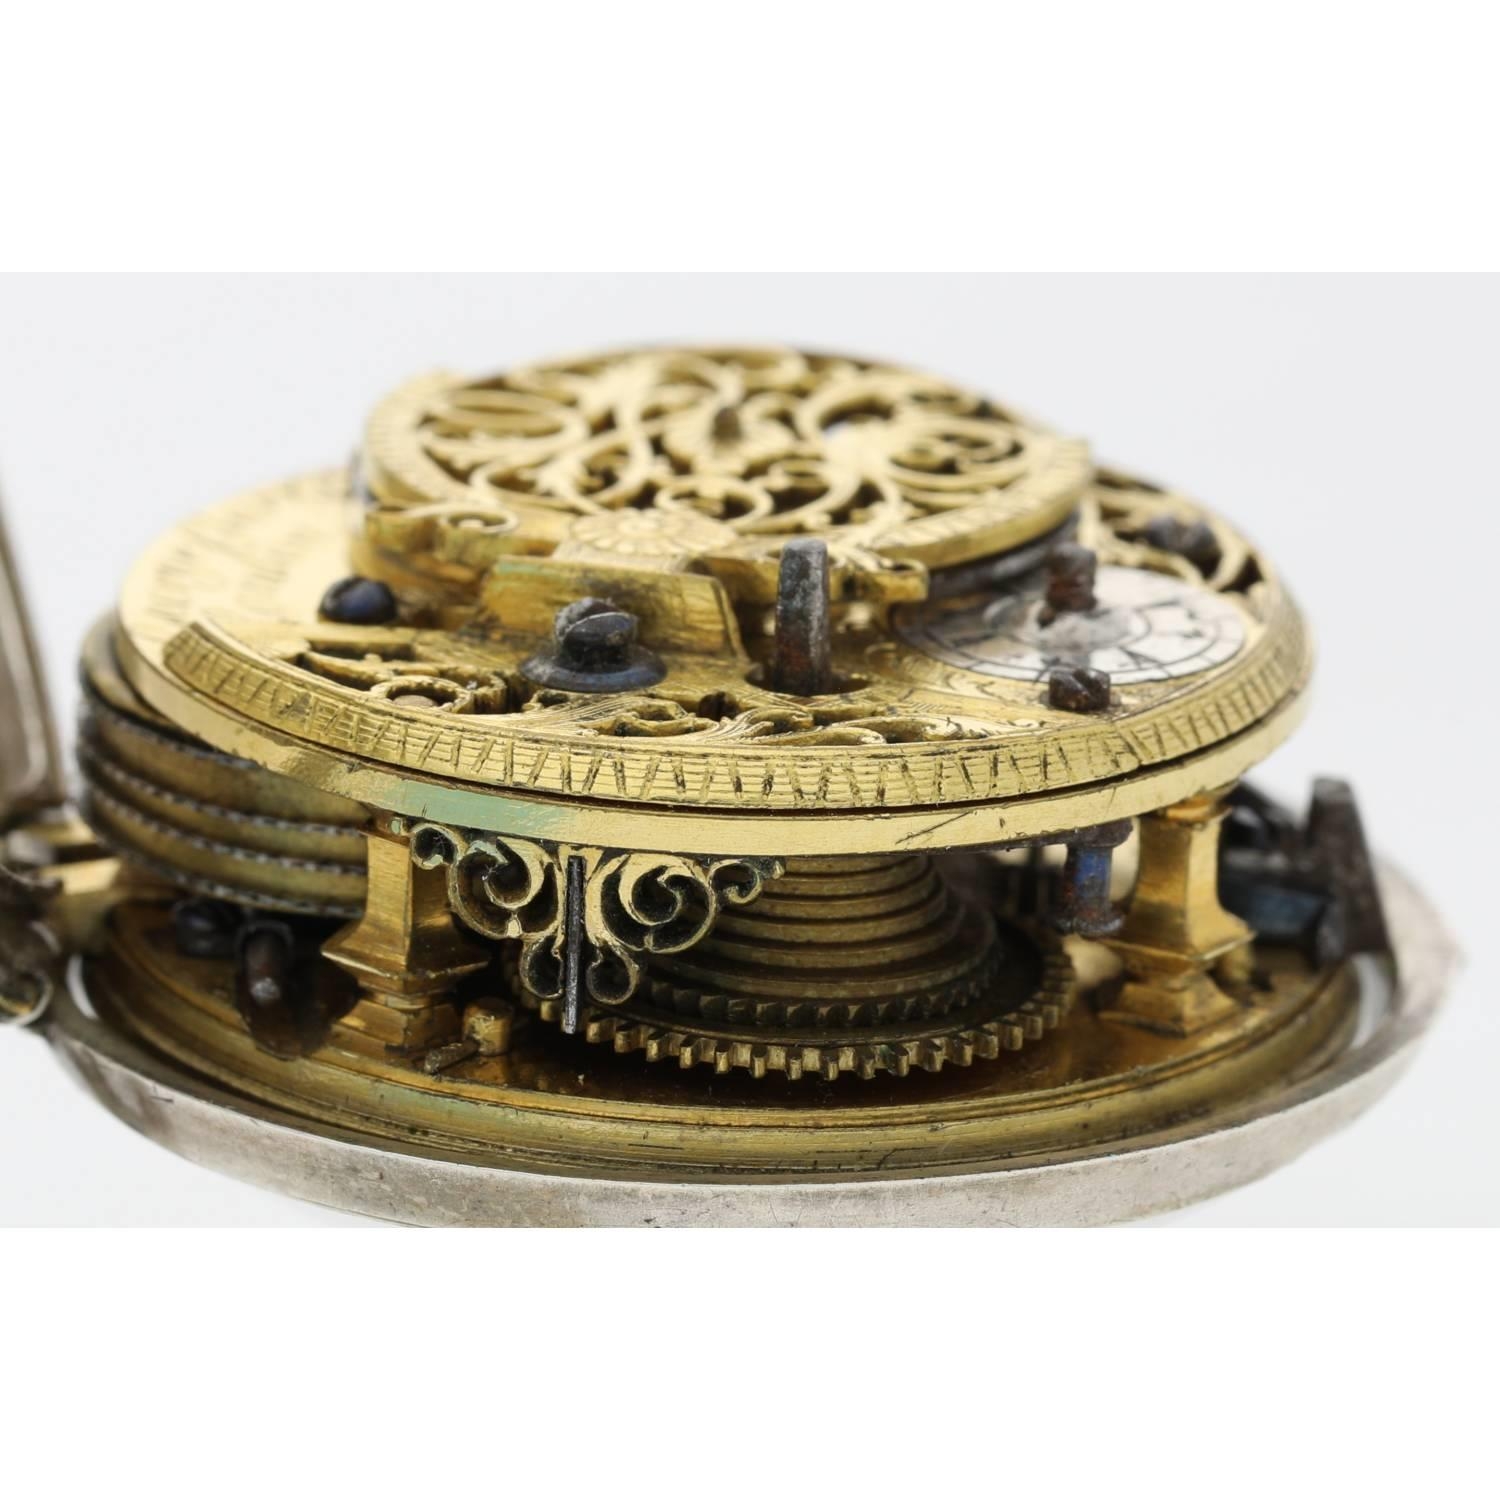 George Prior, London - English 18th century silver repoussé pair cased verge pocket watch for the - Image 5 of 11